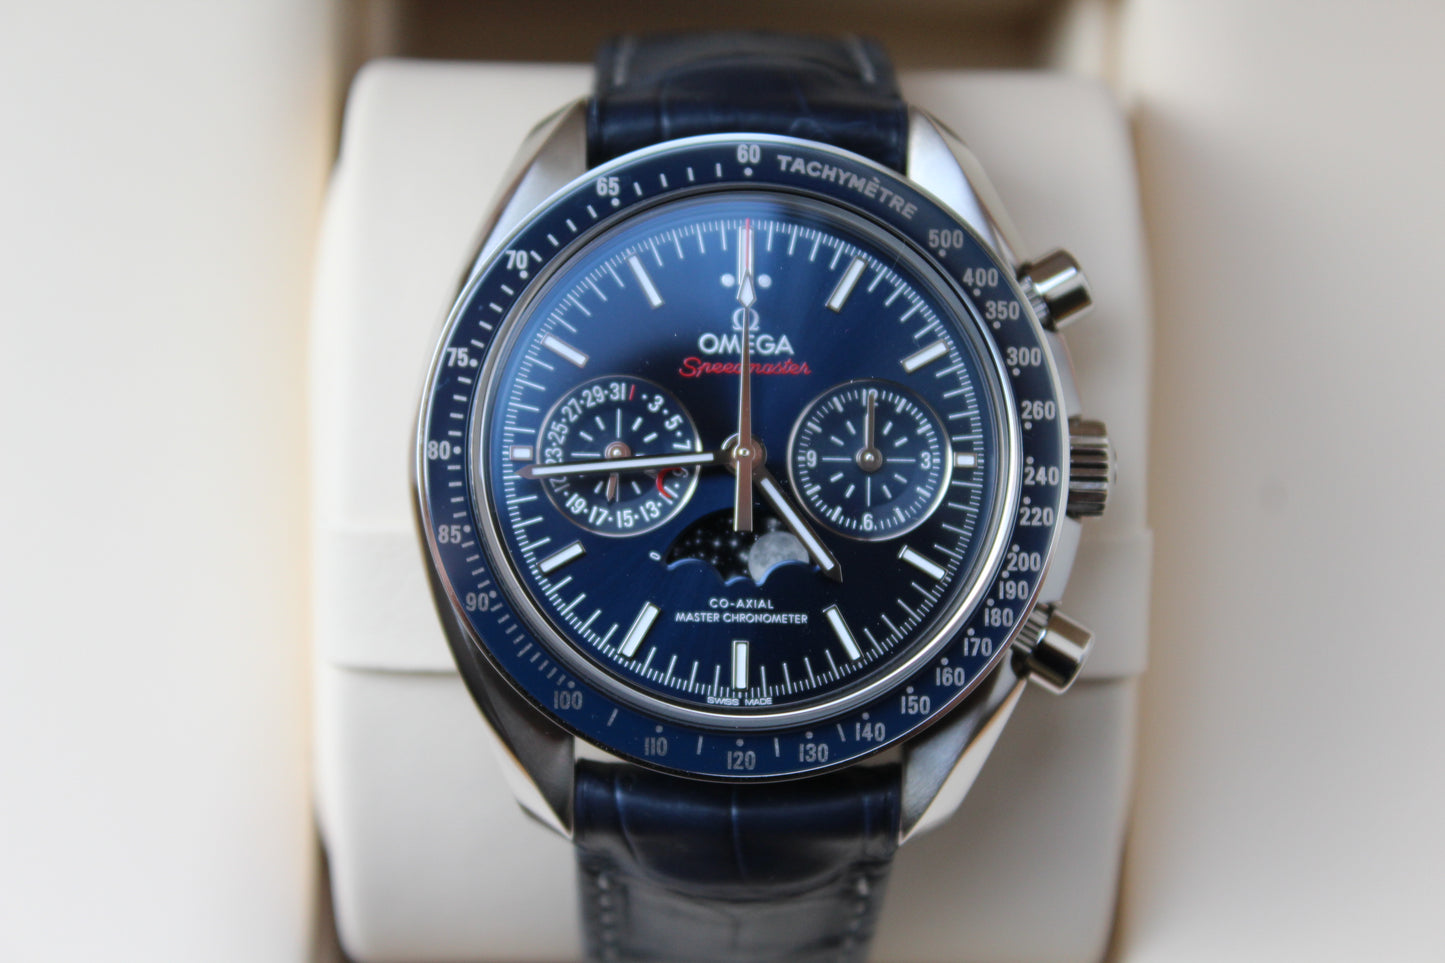 Omega Speedmaster Moonwatch Mondphase Co-Axial 304.33.44.52.03.001